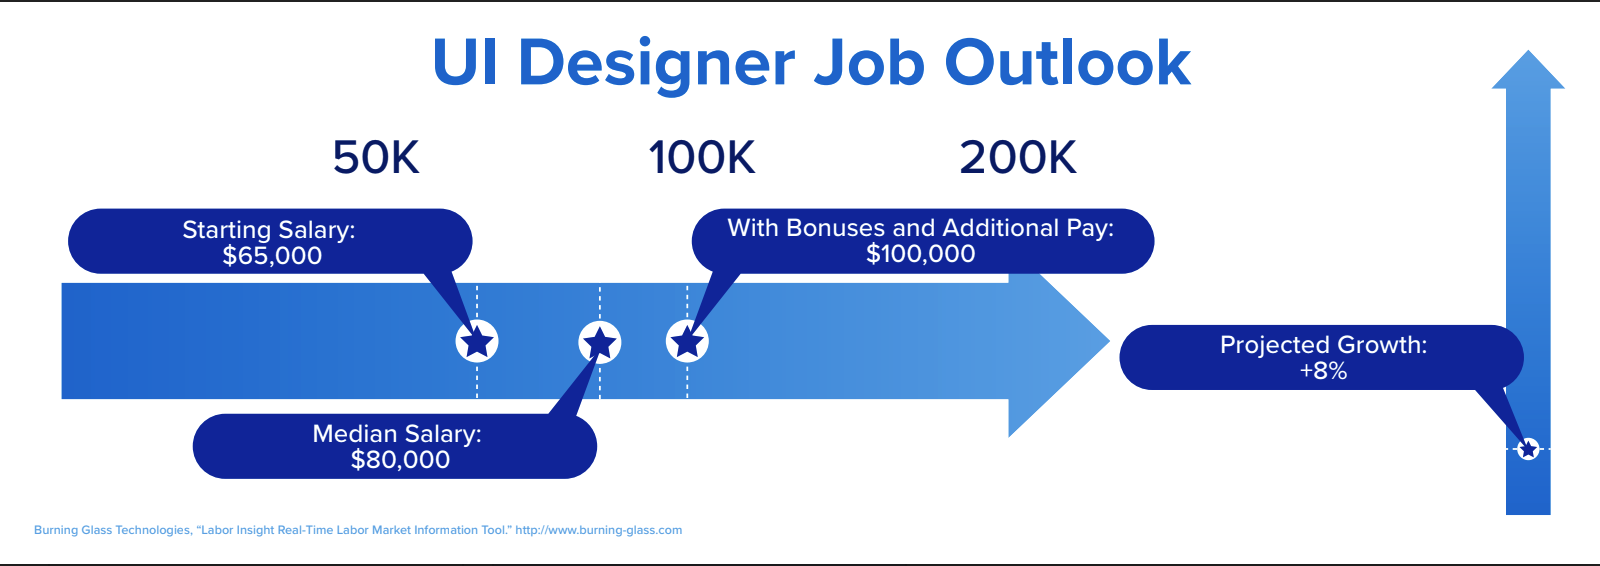 An image depicting some stats about the job market for UI designers.